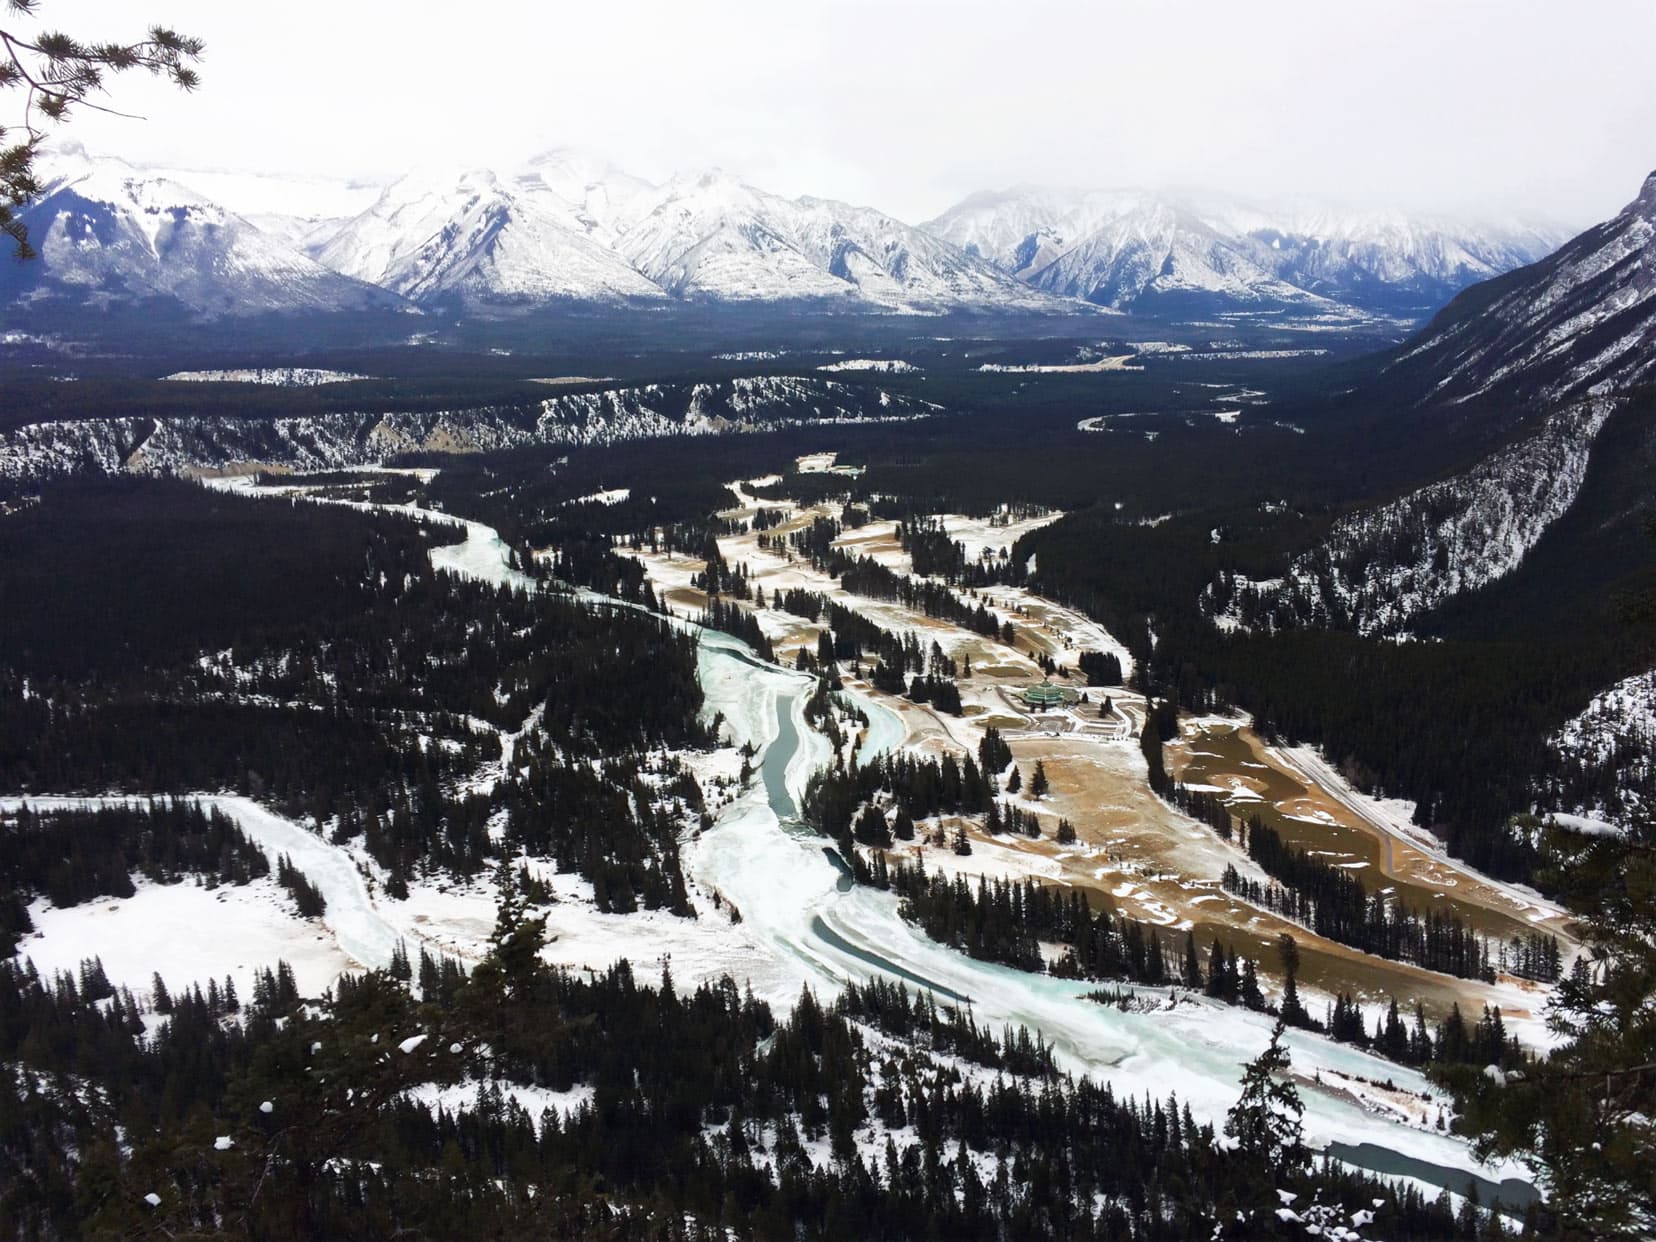 View of the Bow River Valley, Banff